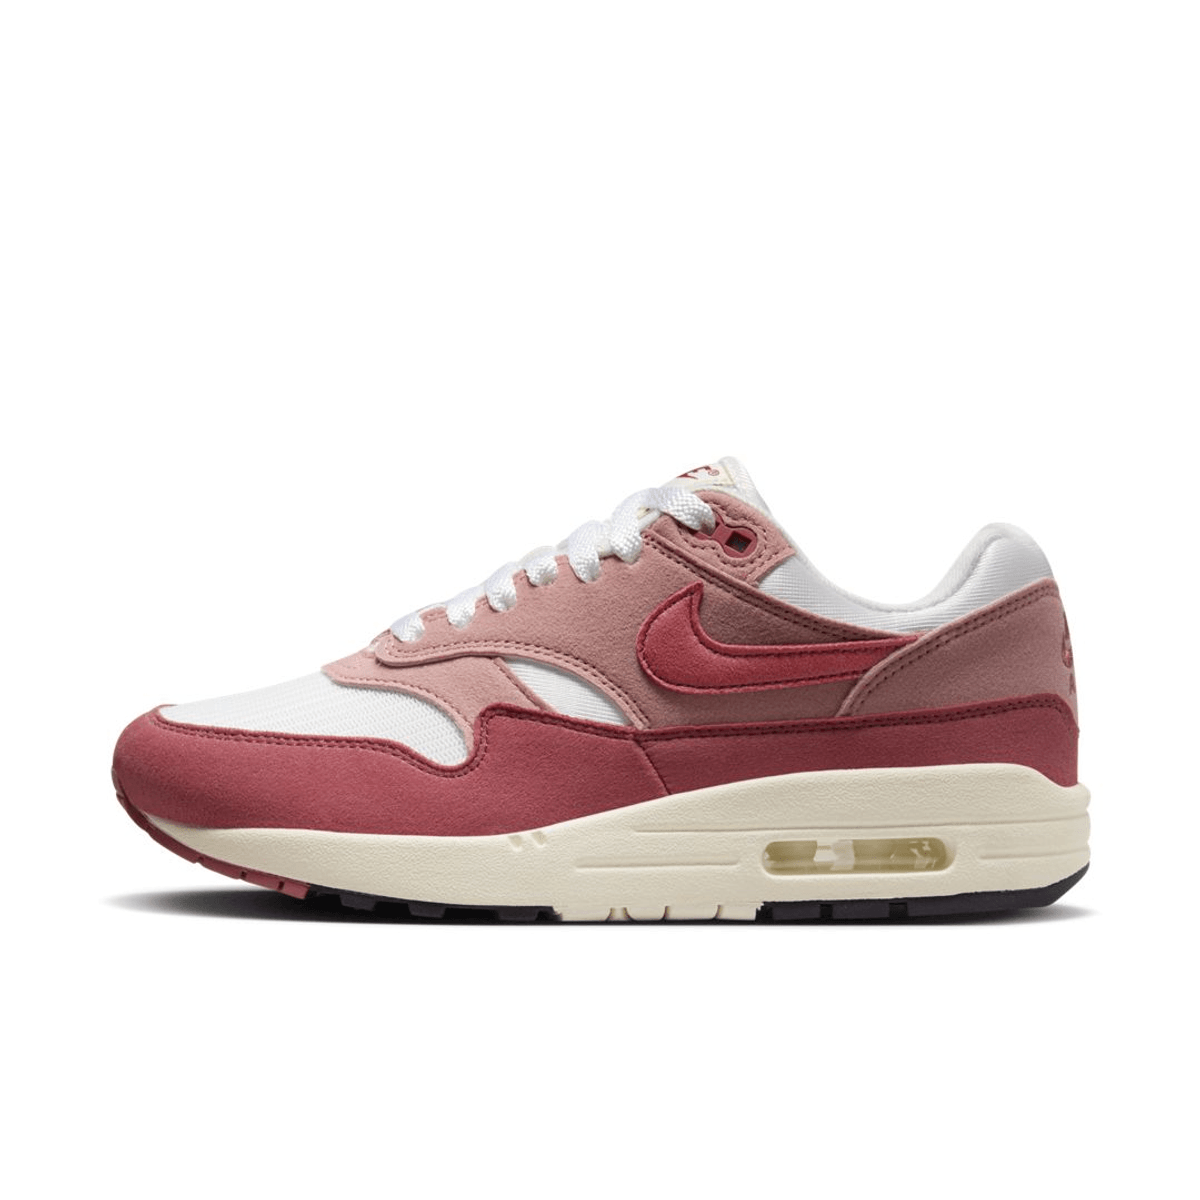 The Nike Air Max 1 “Red Stardust” Releases November 23